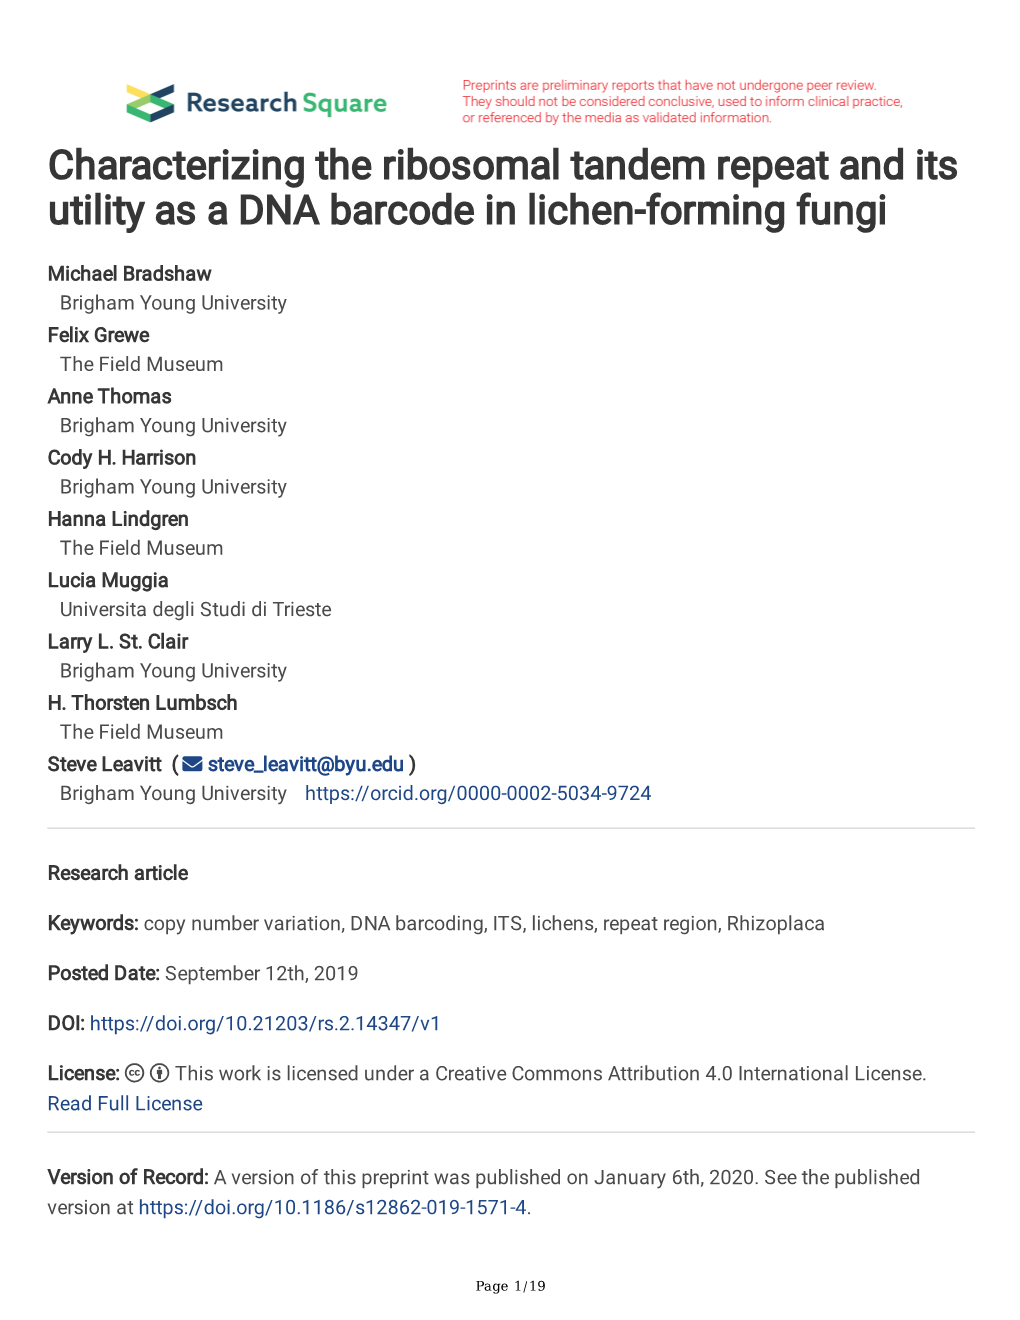 Characterizing the Ribosomal Tandem Repeat and Its Utility As a DNA Barcode in Lichen-Forming Fungi